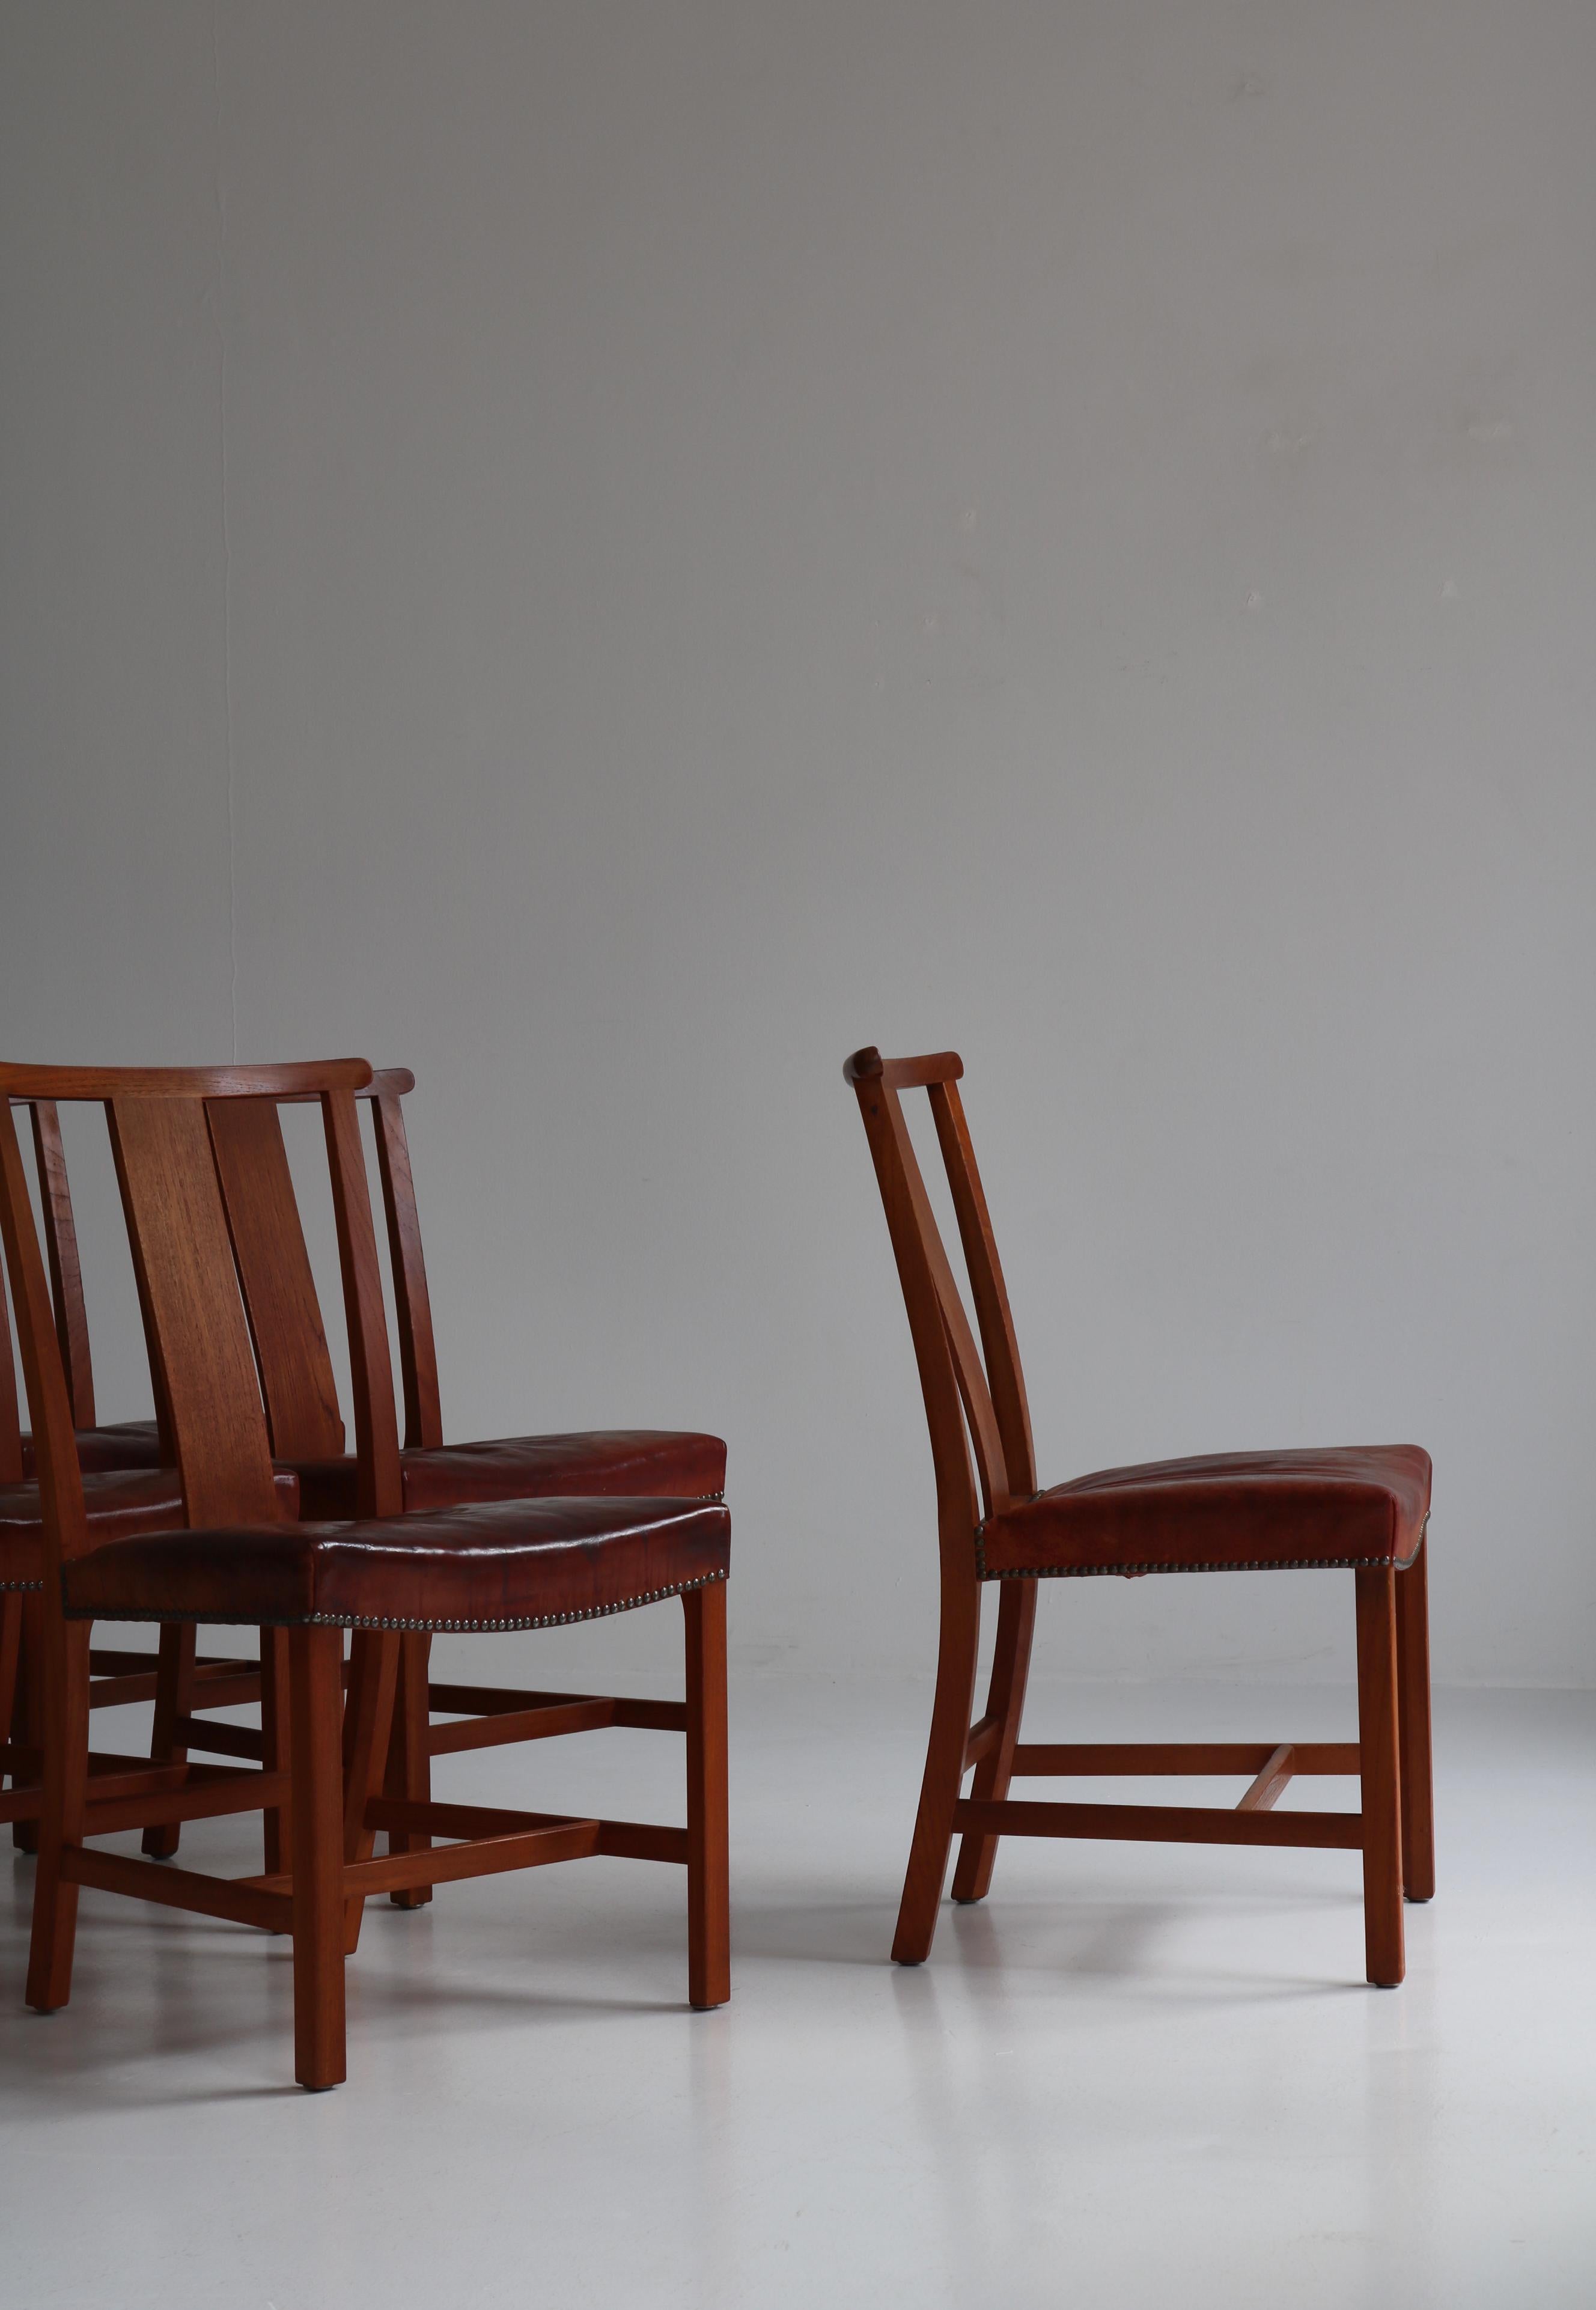 Set of Six Børge Mogensen Dining Chairs in Teak & Niger Leather, 1939, Denmark For Sale 1